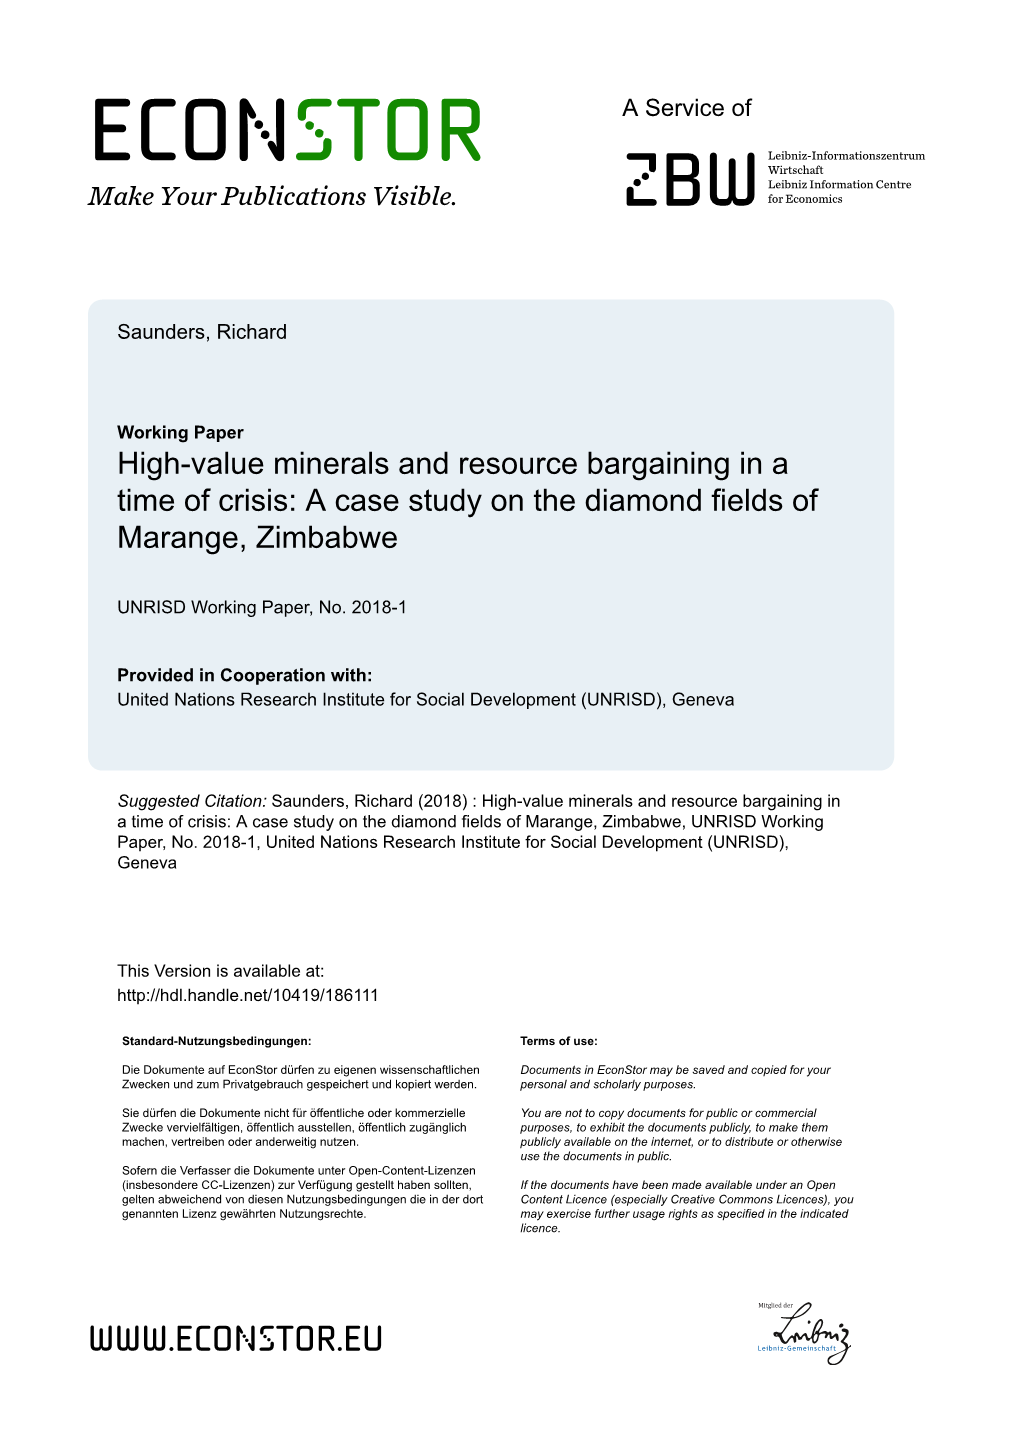 High-Value Minerals and Resource Bargaining in a Time of Crisis: a Case Study on the Diamond Fields of Marange, Zimbabwe